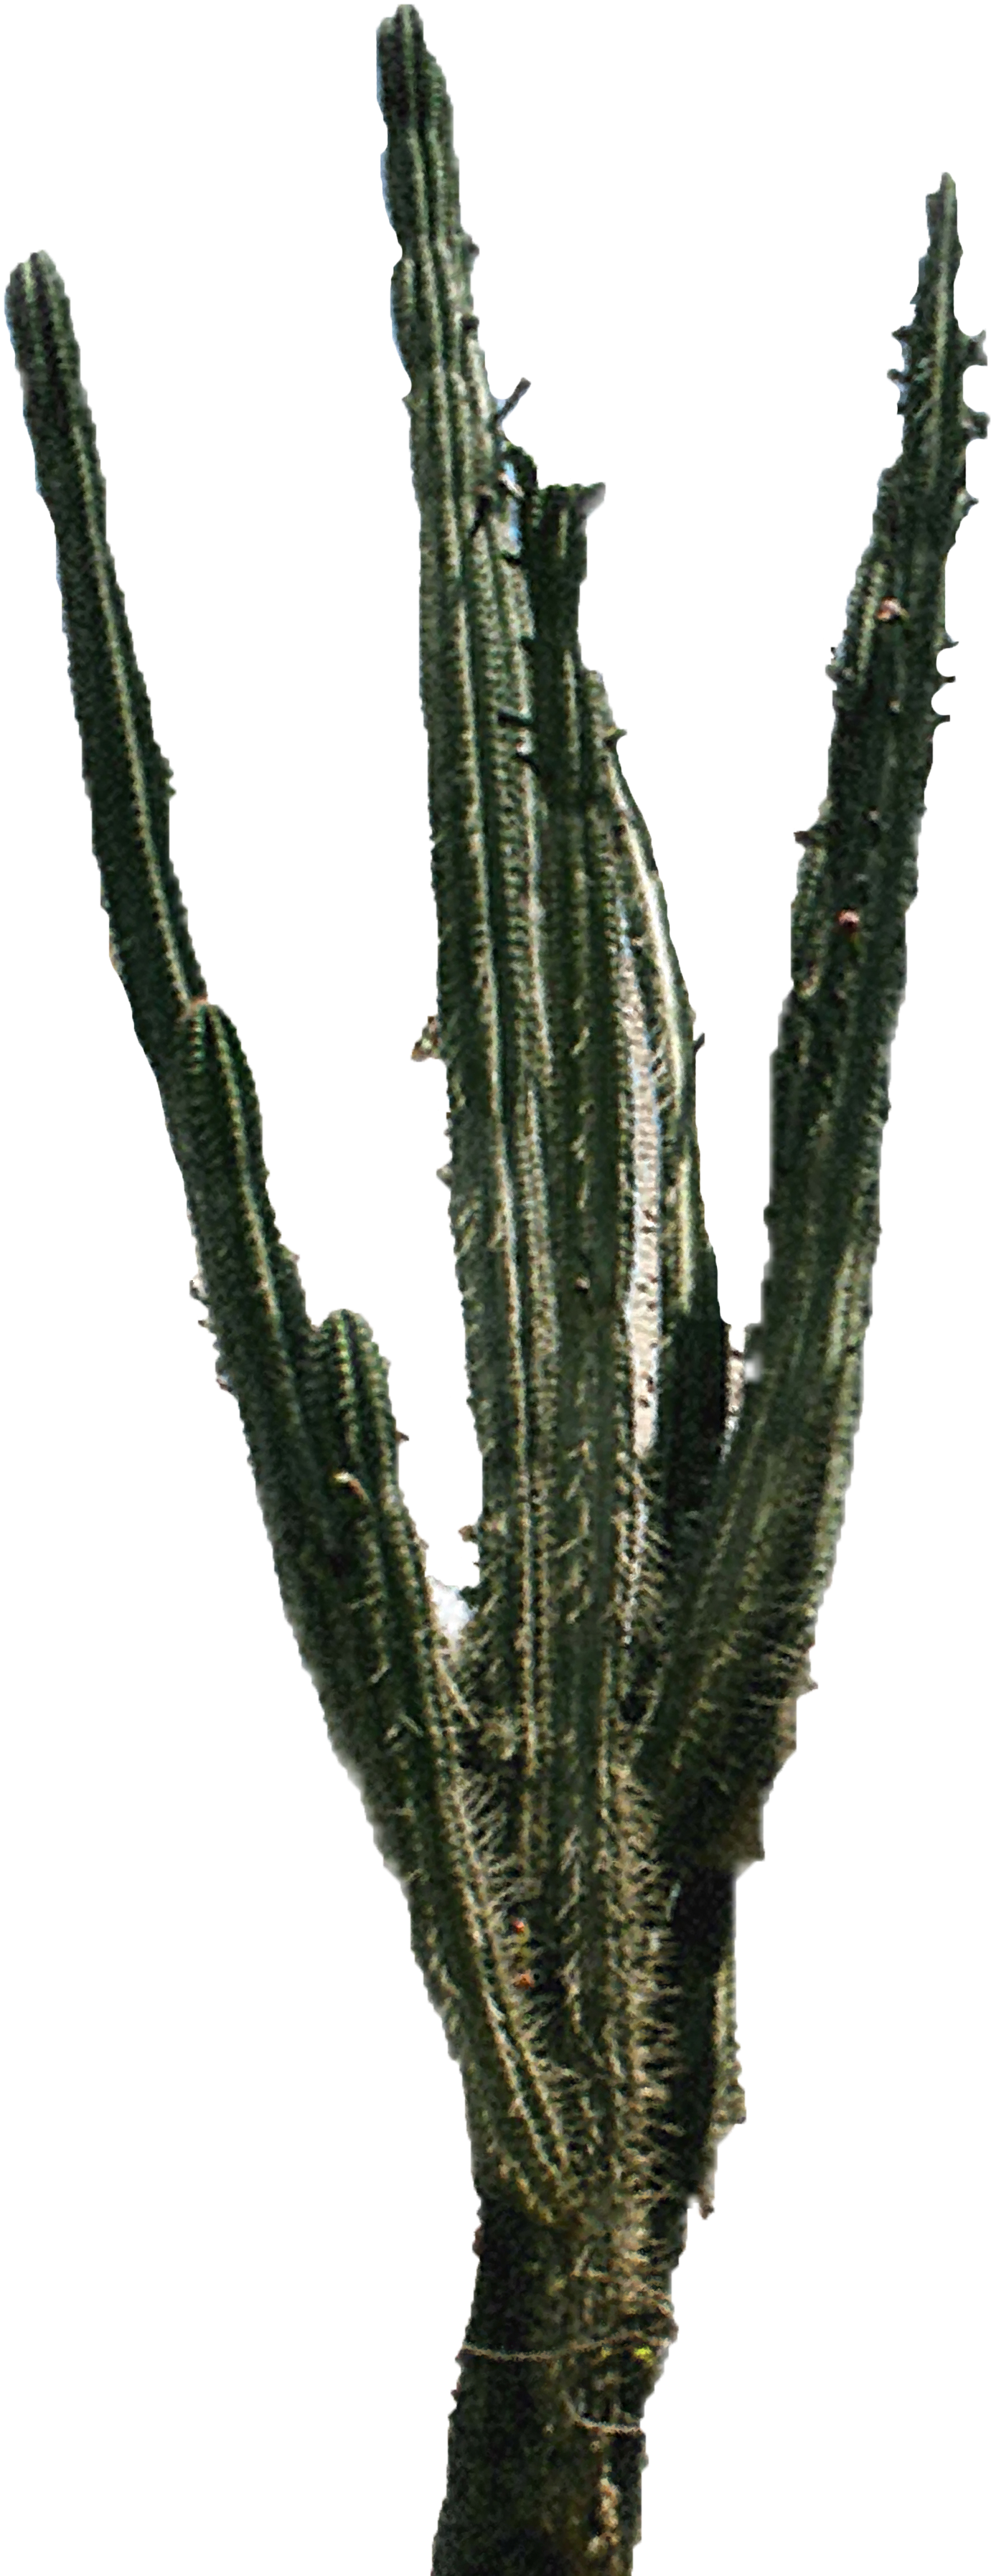 Download Free High-quality Cactus Png Transparent Images - Portable Network Graphics (1800x3600)